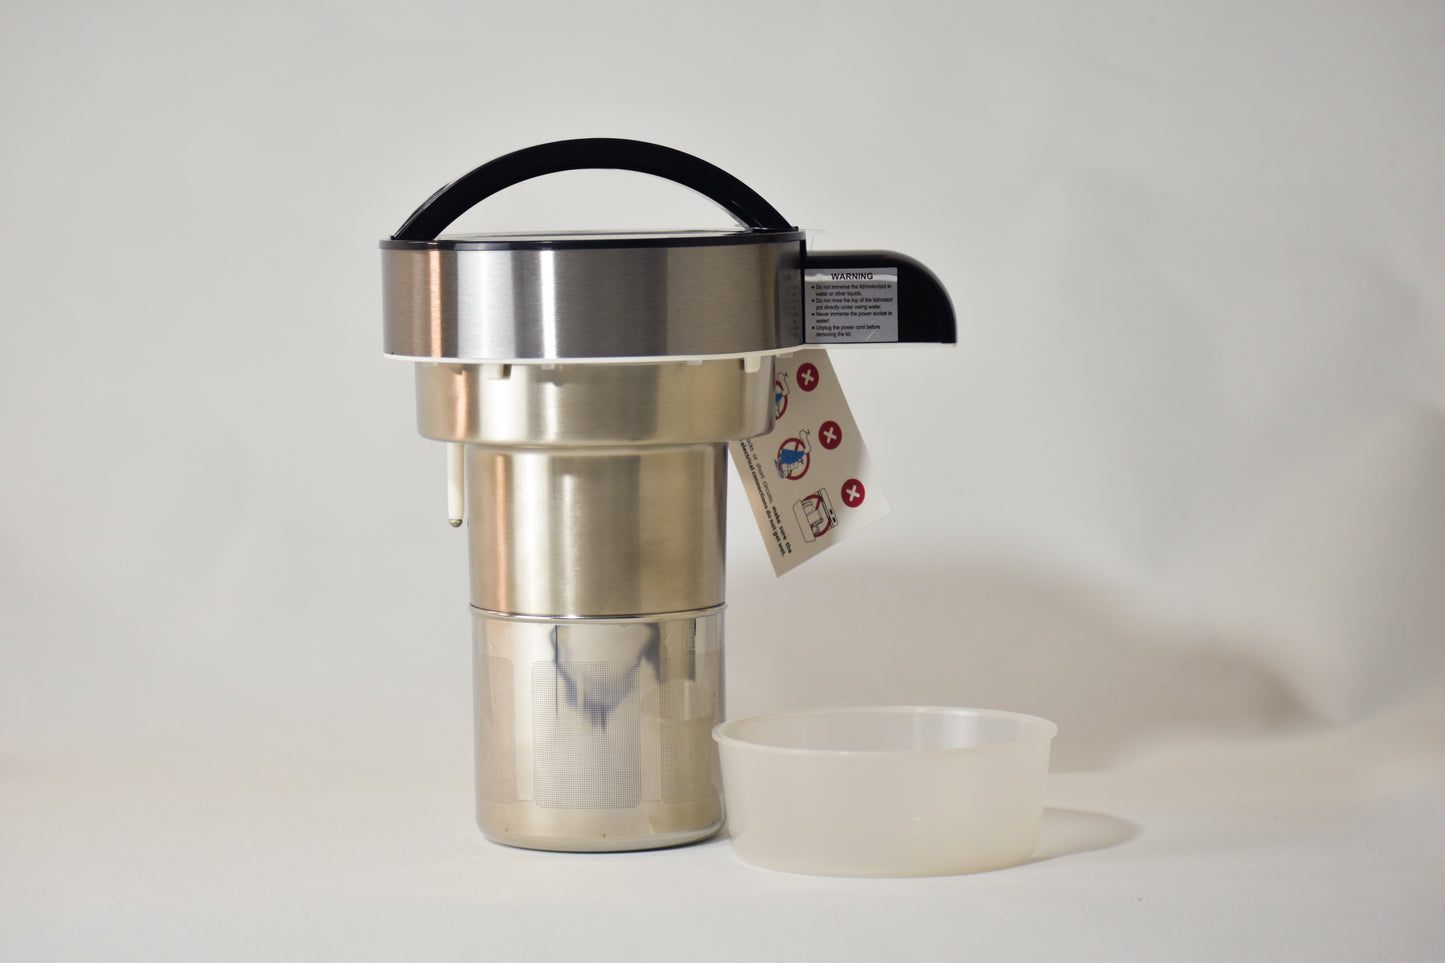 Cosy Up Multi-Maker - Make Nut, Grain and Seed Milk, Fruit and tea infusions in about 3 mins, Hot Soup and Hot milk in about 25 mins. In the comfort of your home, without the mess.